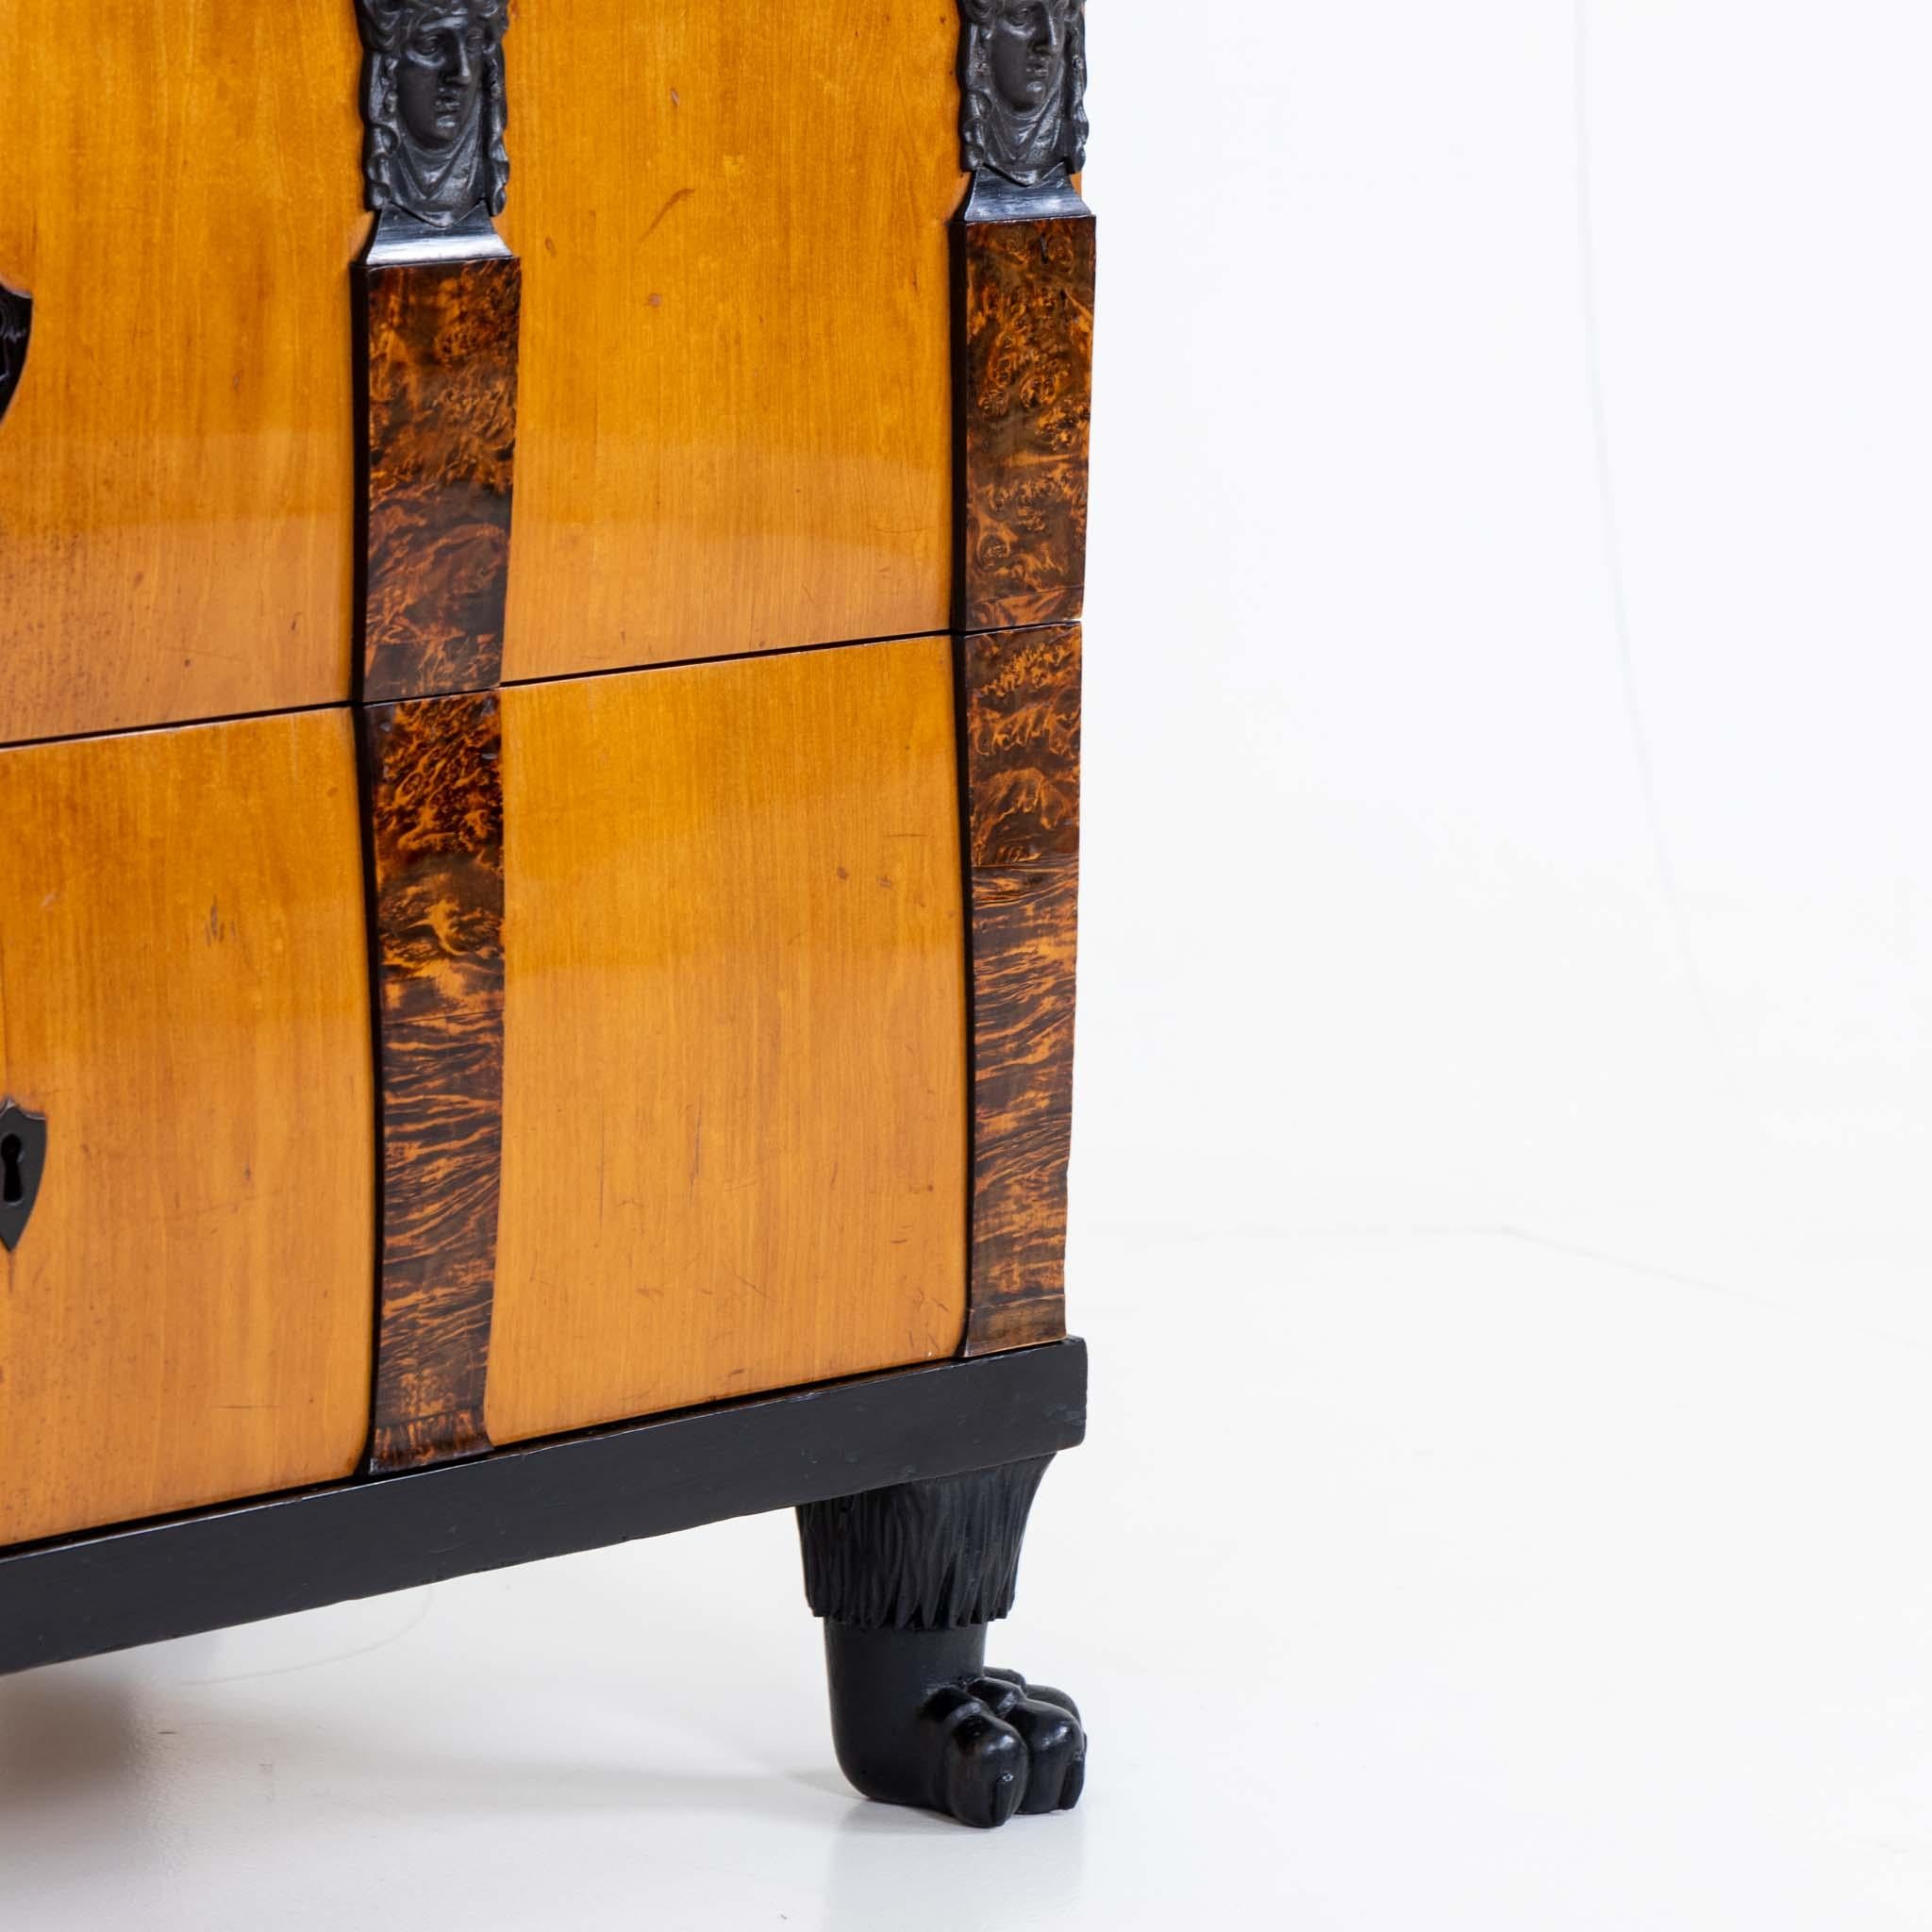 A pair of Important chests in maple with burl veneer and ebonized details. Extraordinarily crafted Berlin cast iron intricate designs and four caryatids on the front of each chest. Resting on four ebonzied paw feet.